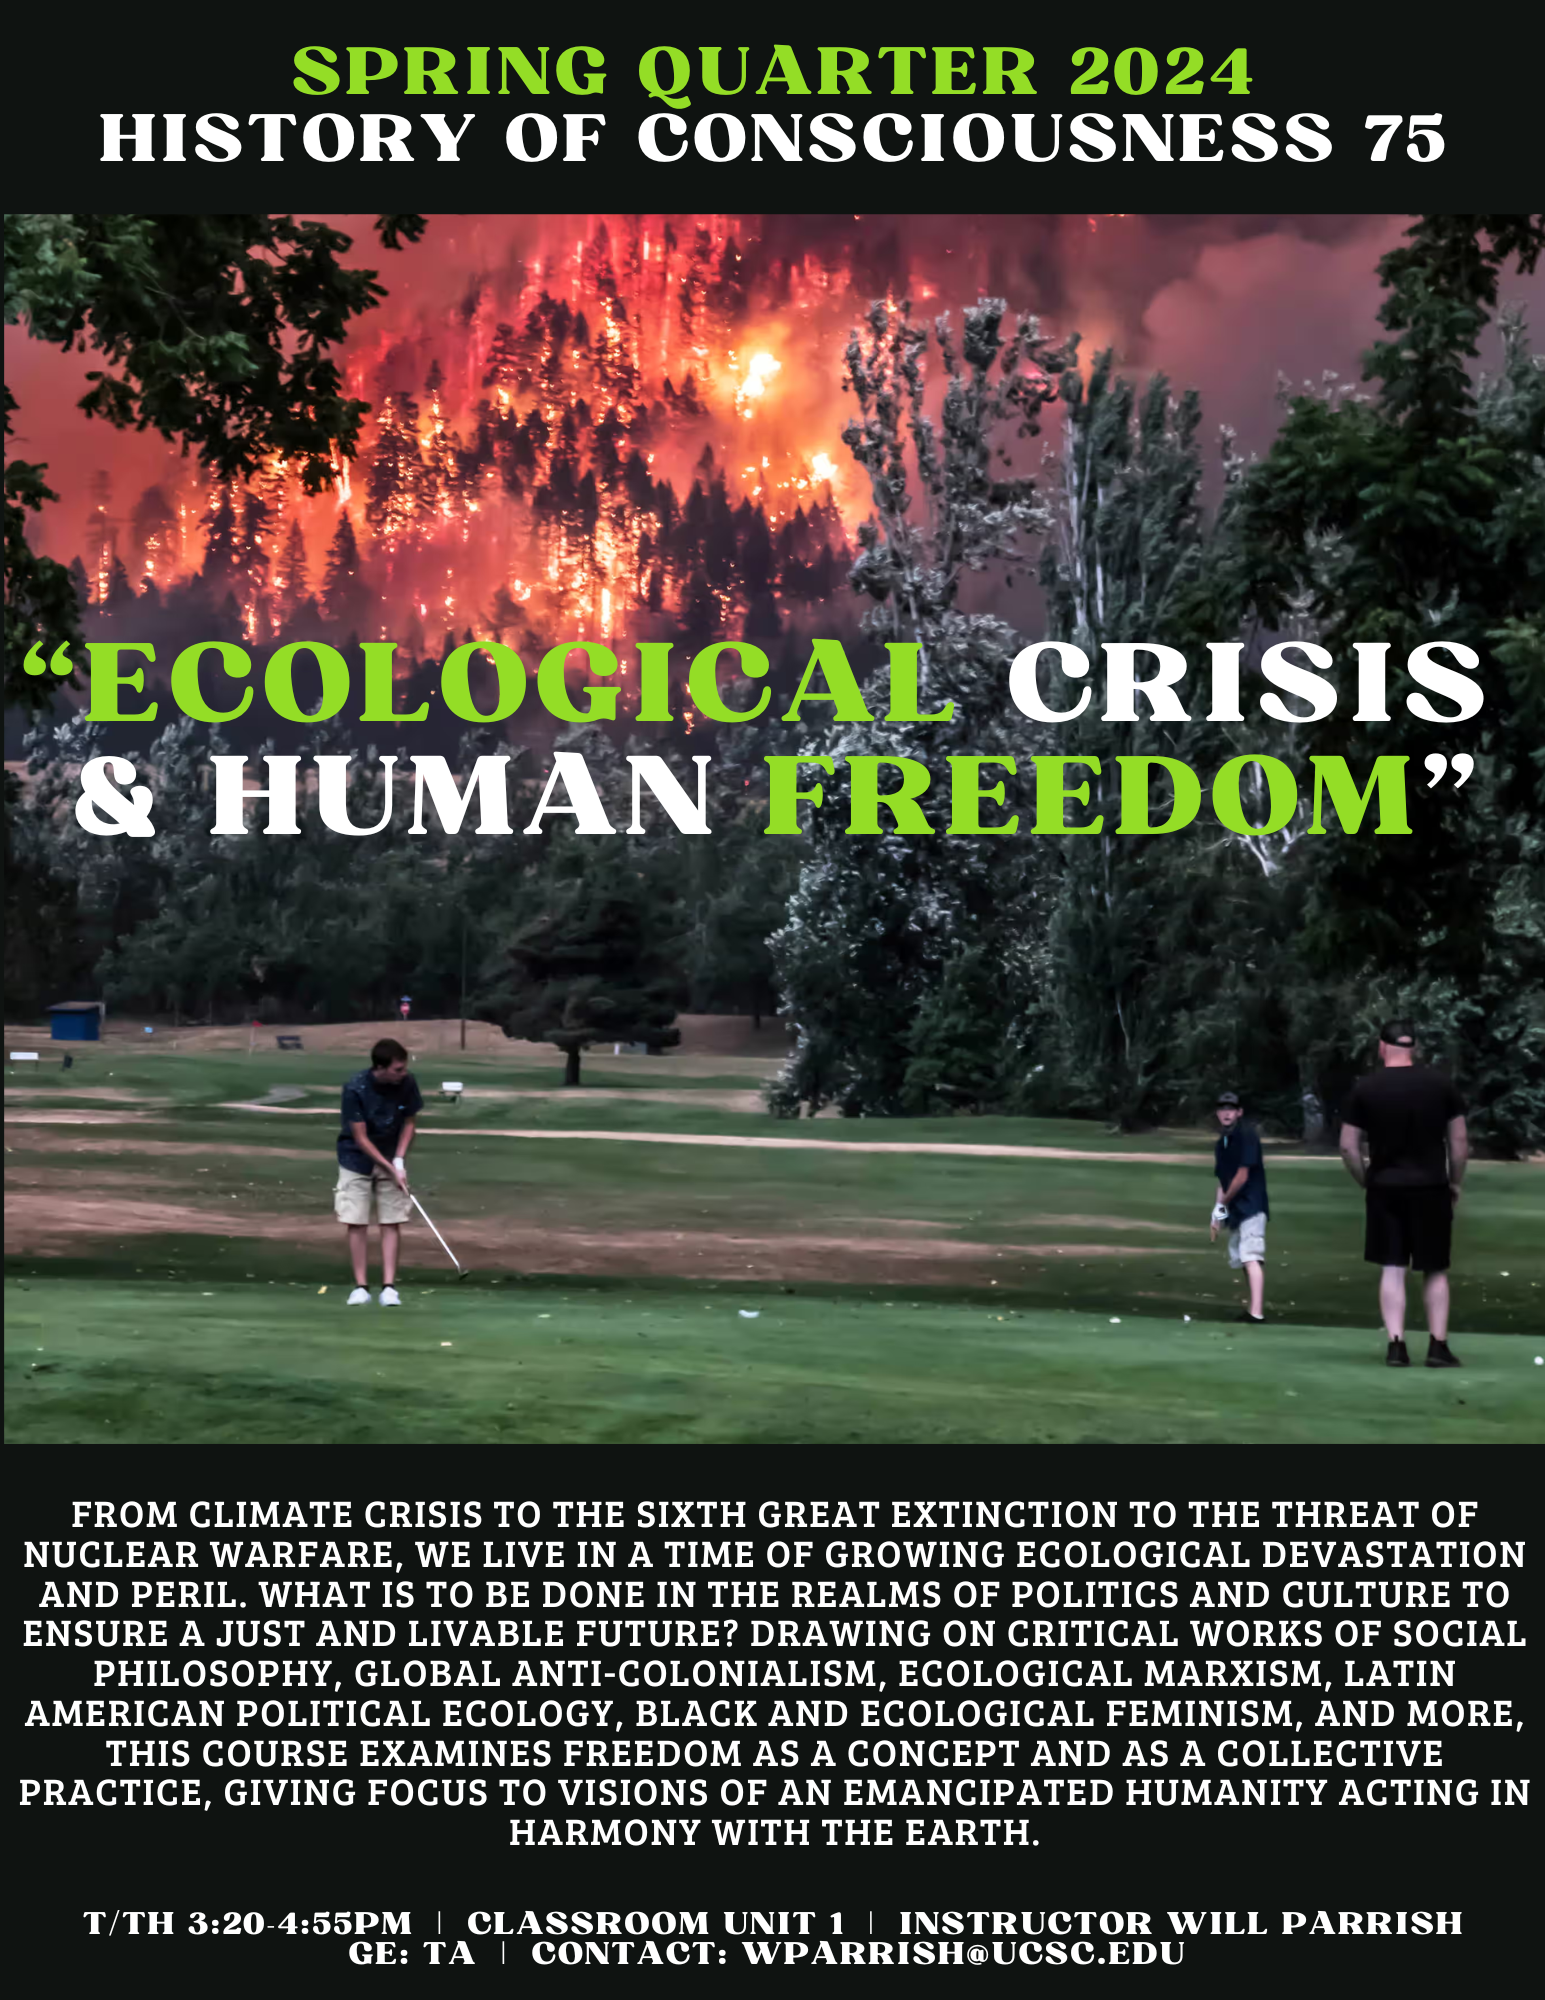 HISC 75: Ecological Crisis & Human Freedom